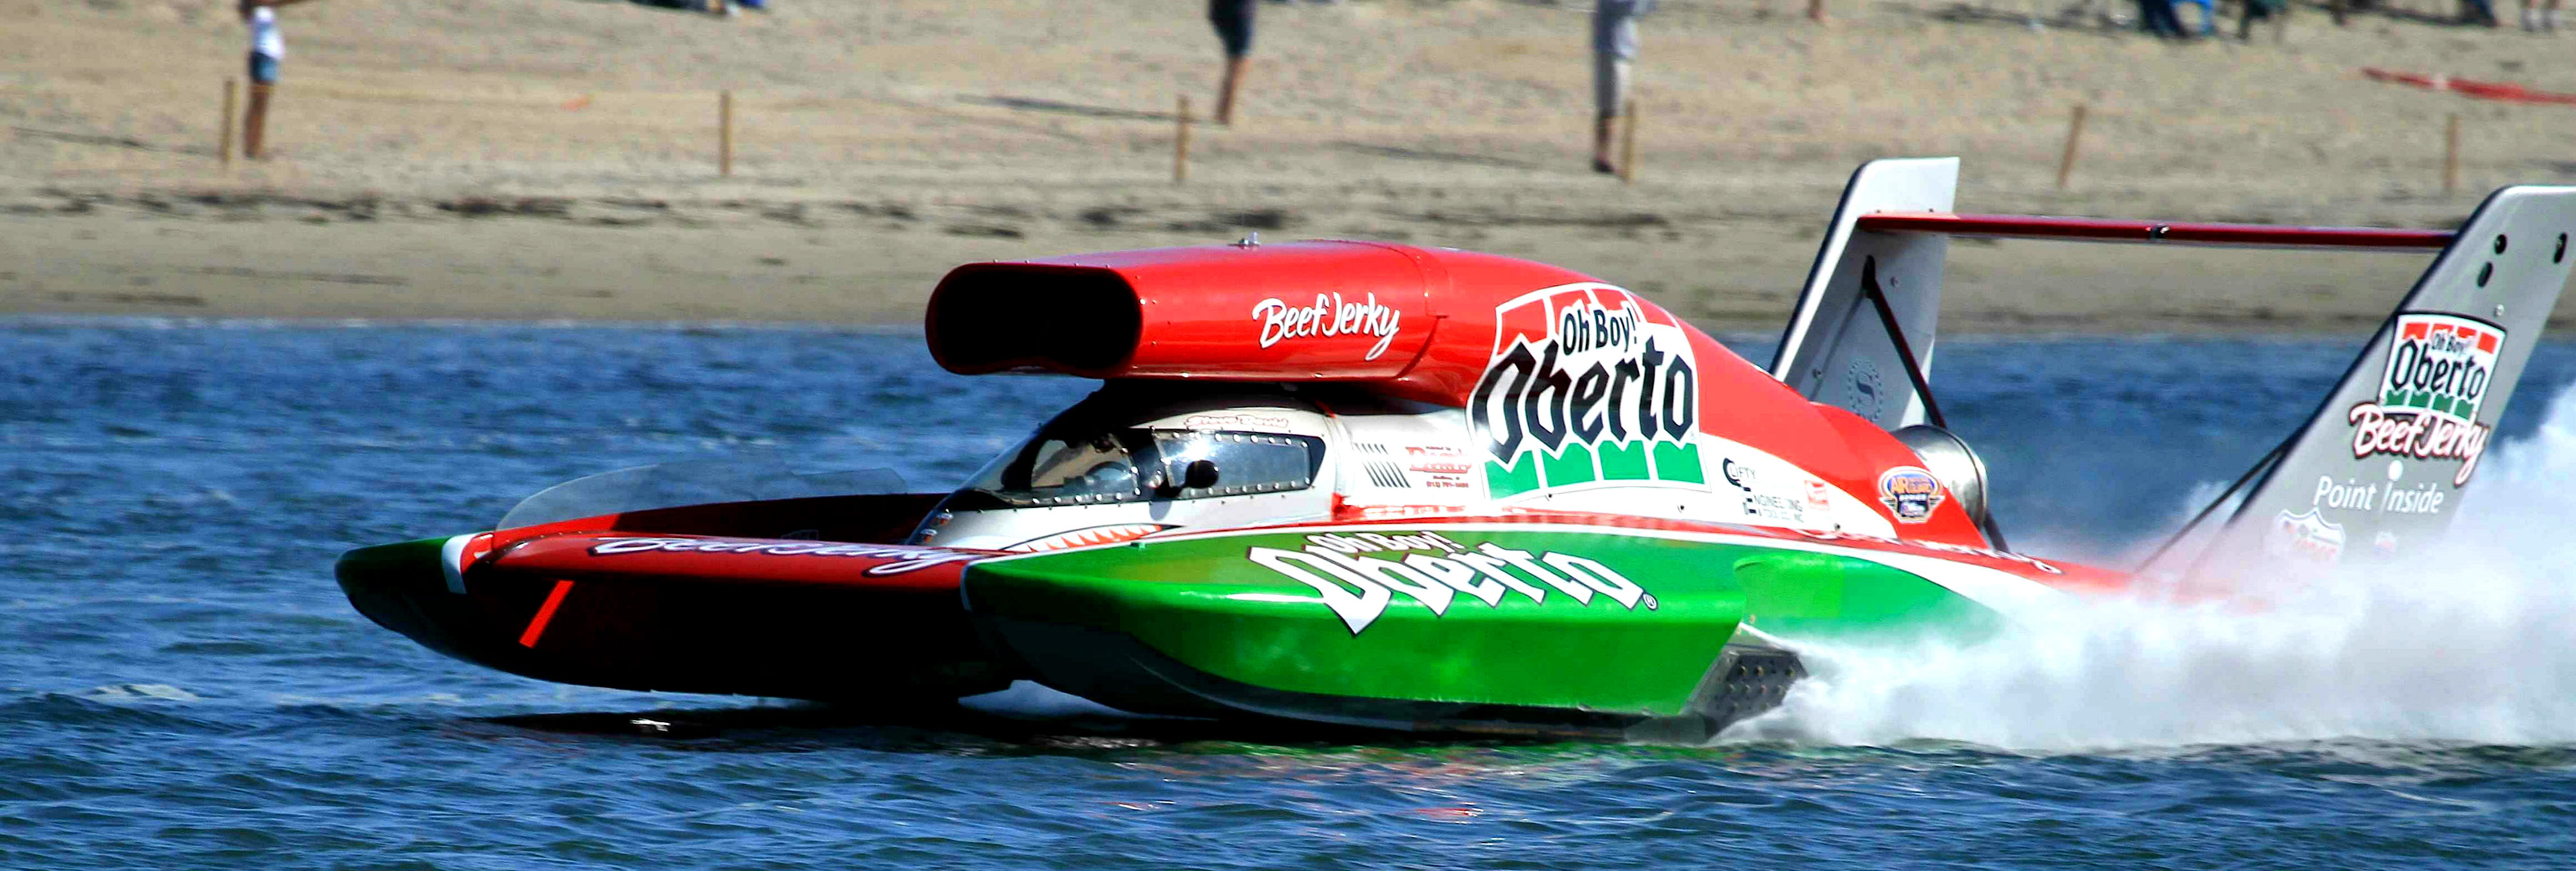 unlimited hydroplane, Race, Racing, Jet, Hydroplane, Boat, Ship, Hot, Rod, Rods, Tp Wallpaper